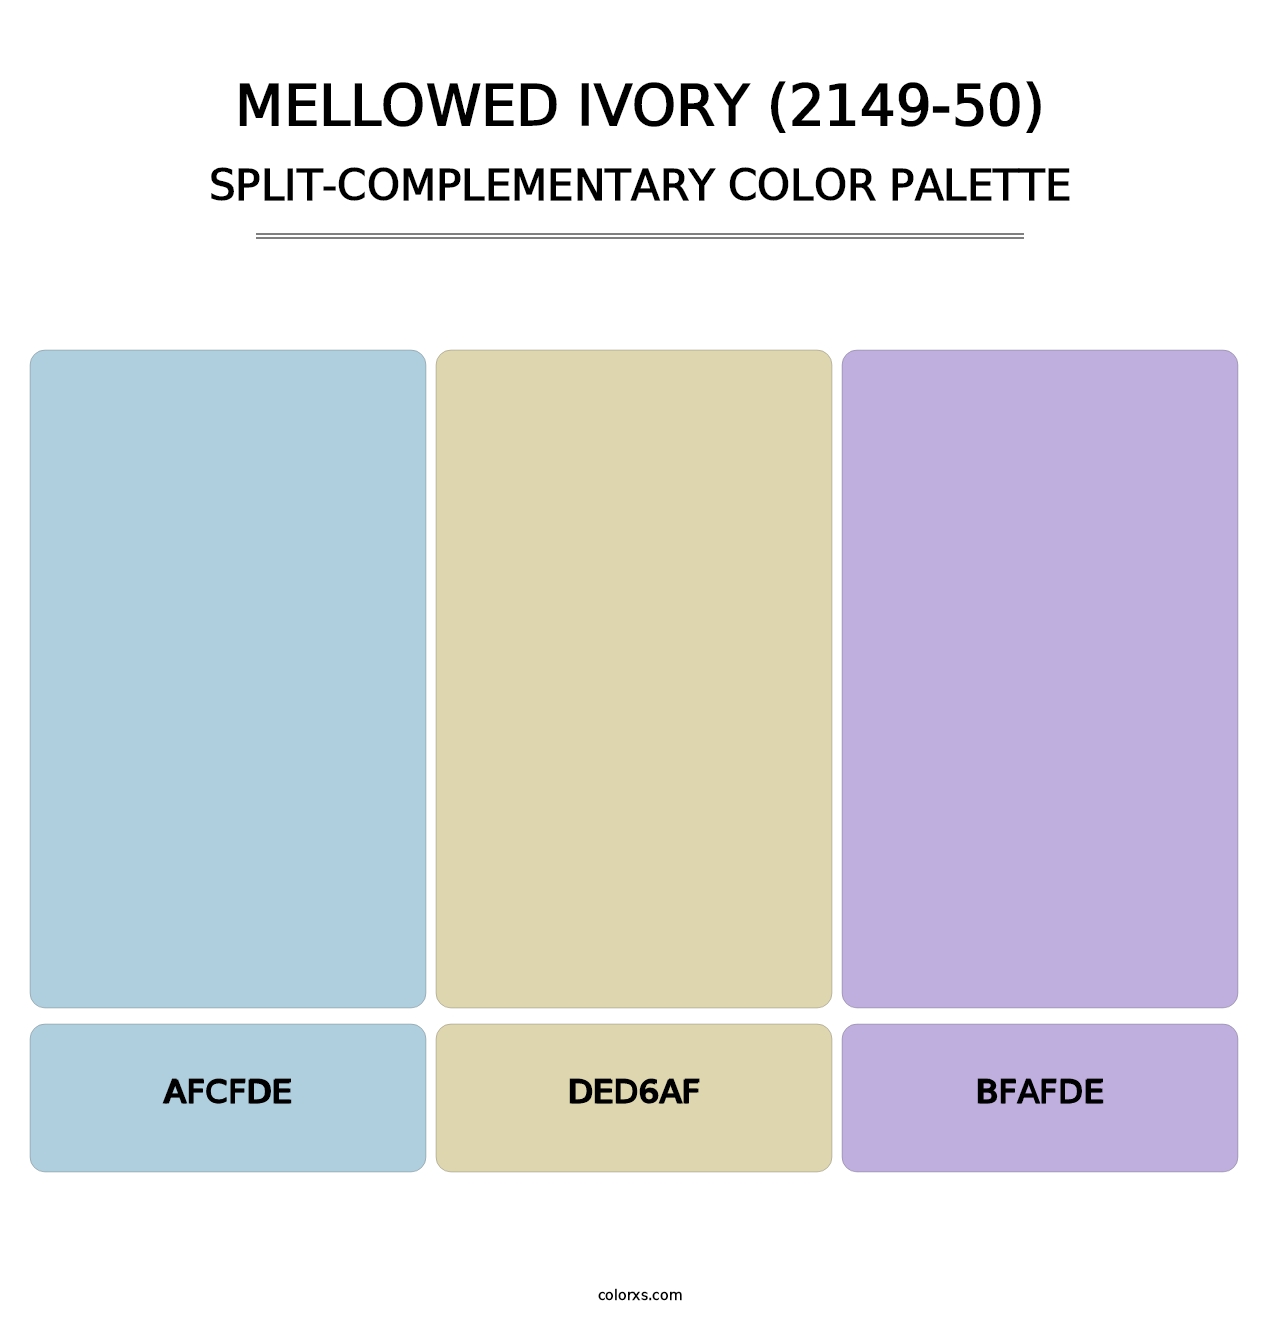 Mellowed Ivory (2149-50) - Split-Complementary Color Palette